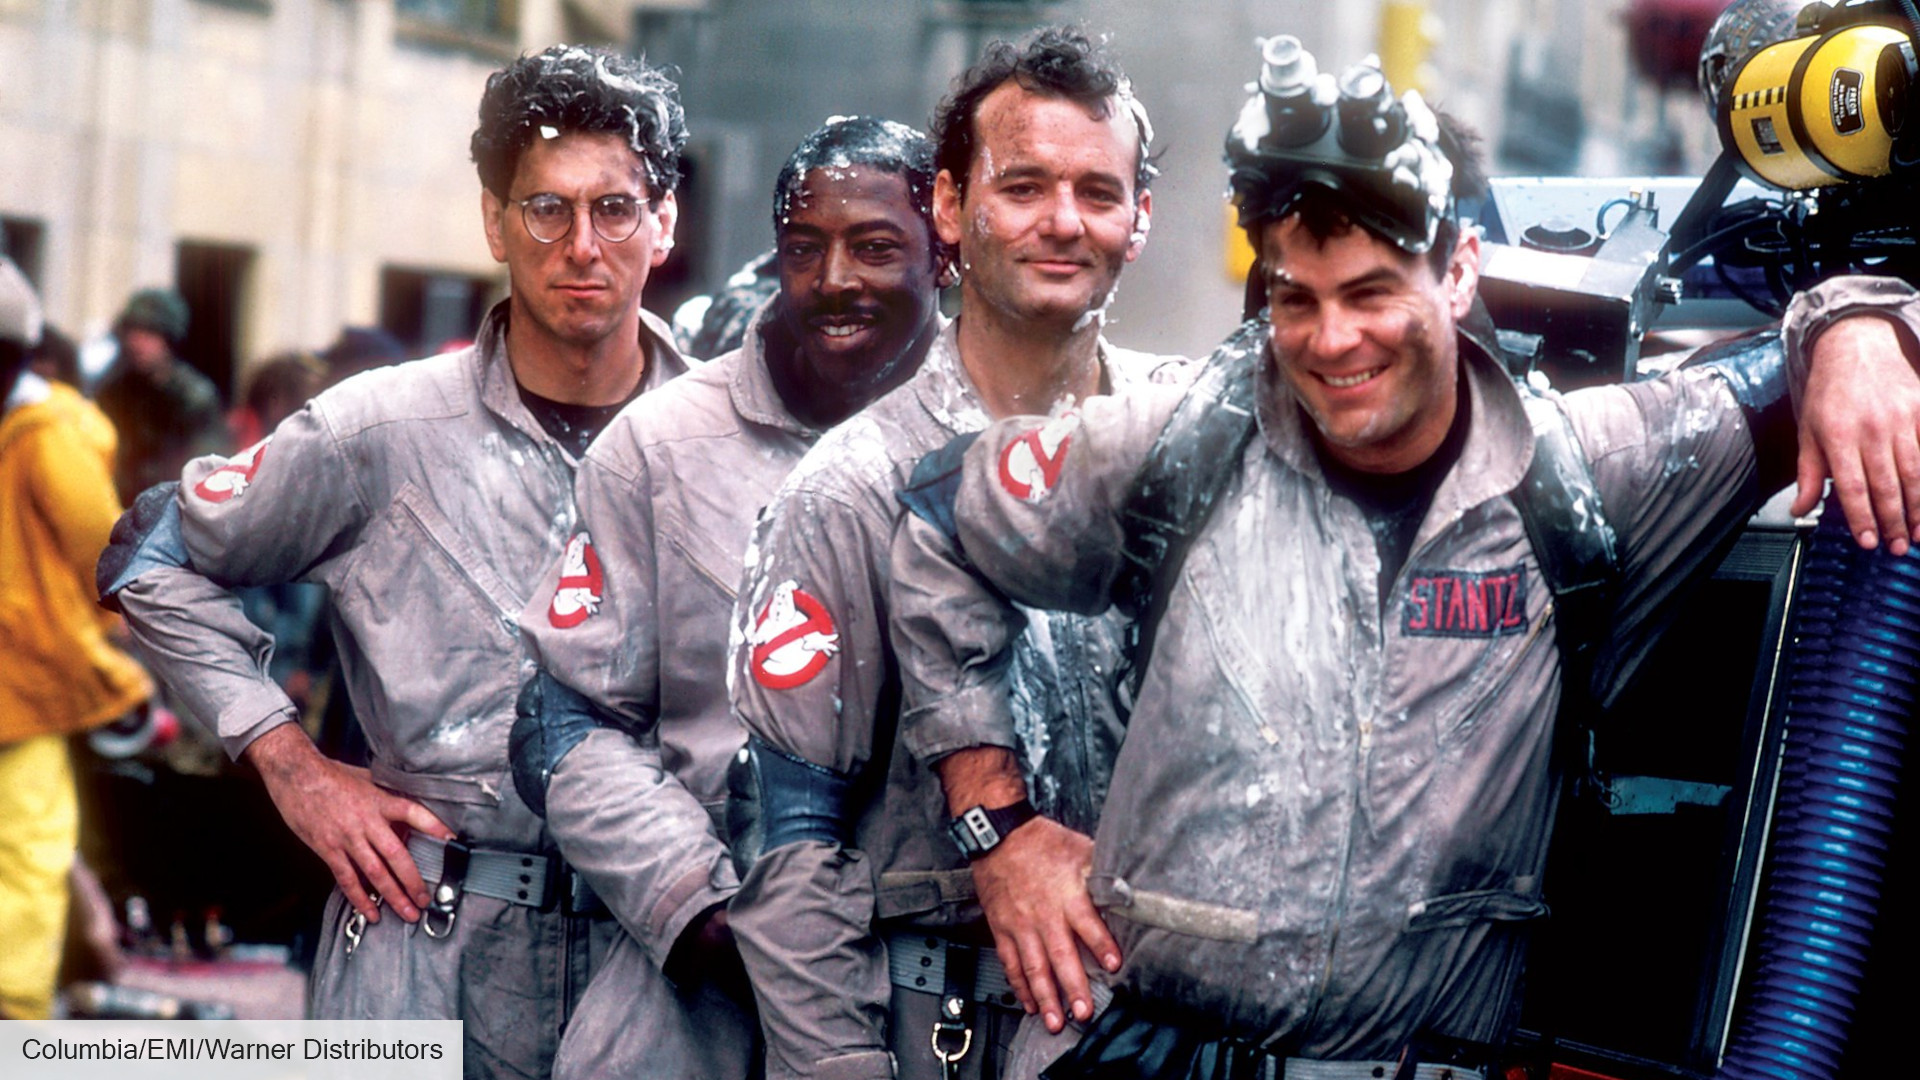 Ghostbusters 4 release date, cast, plot, trailer, and news